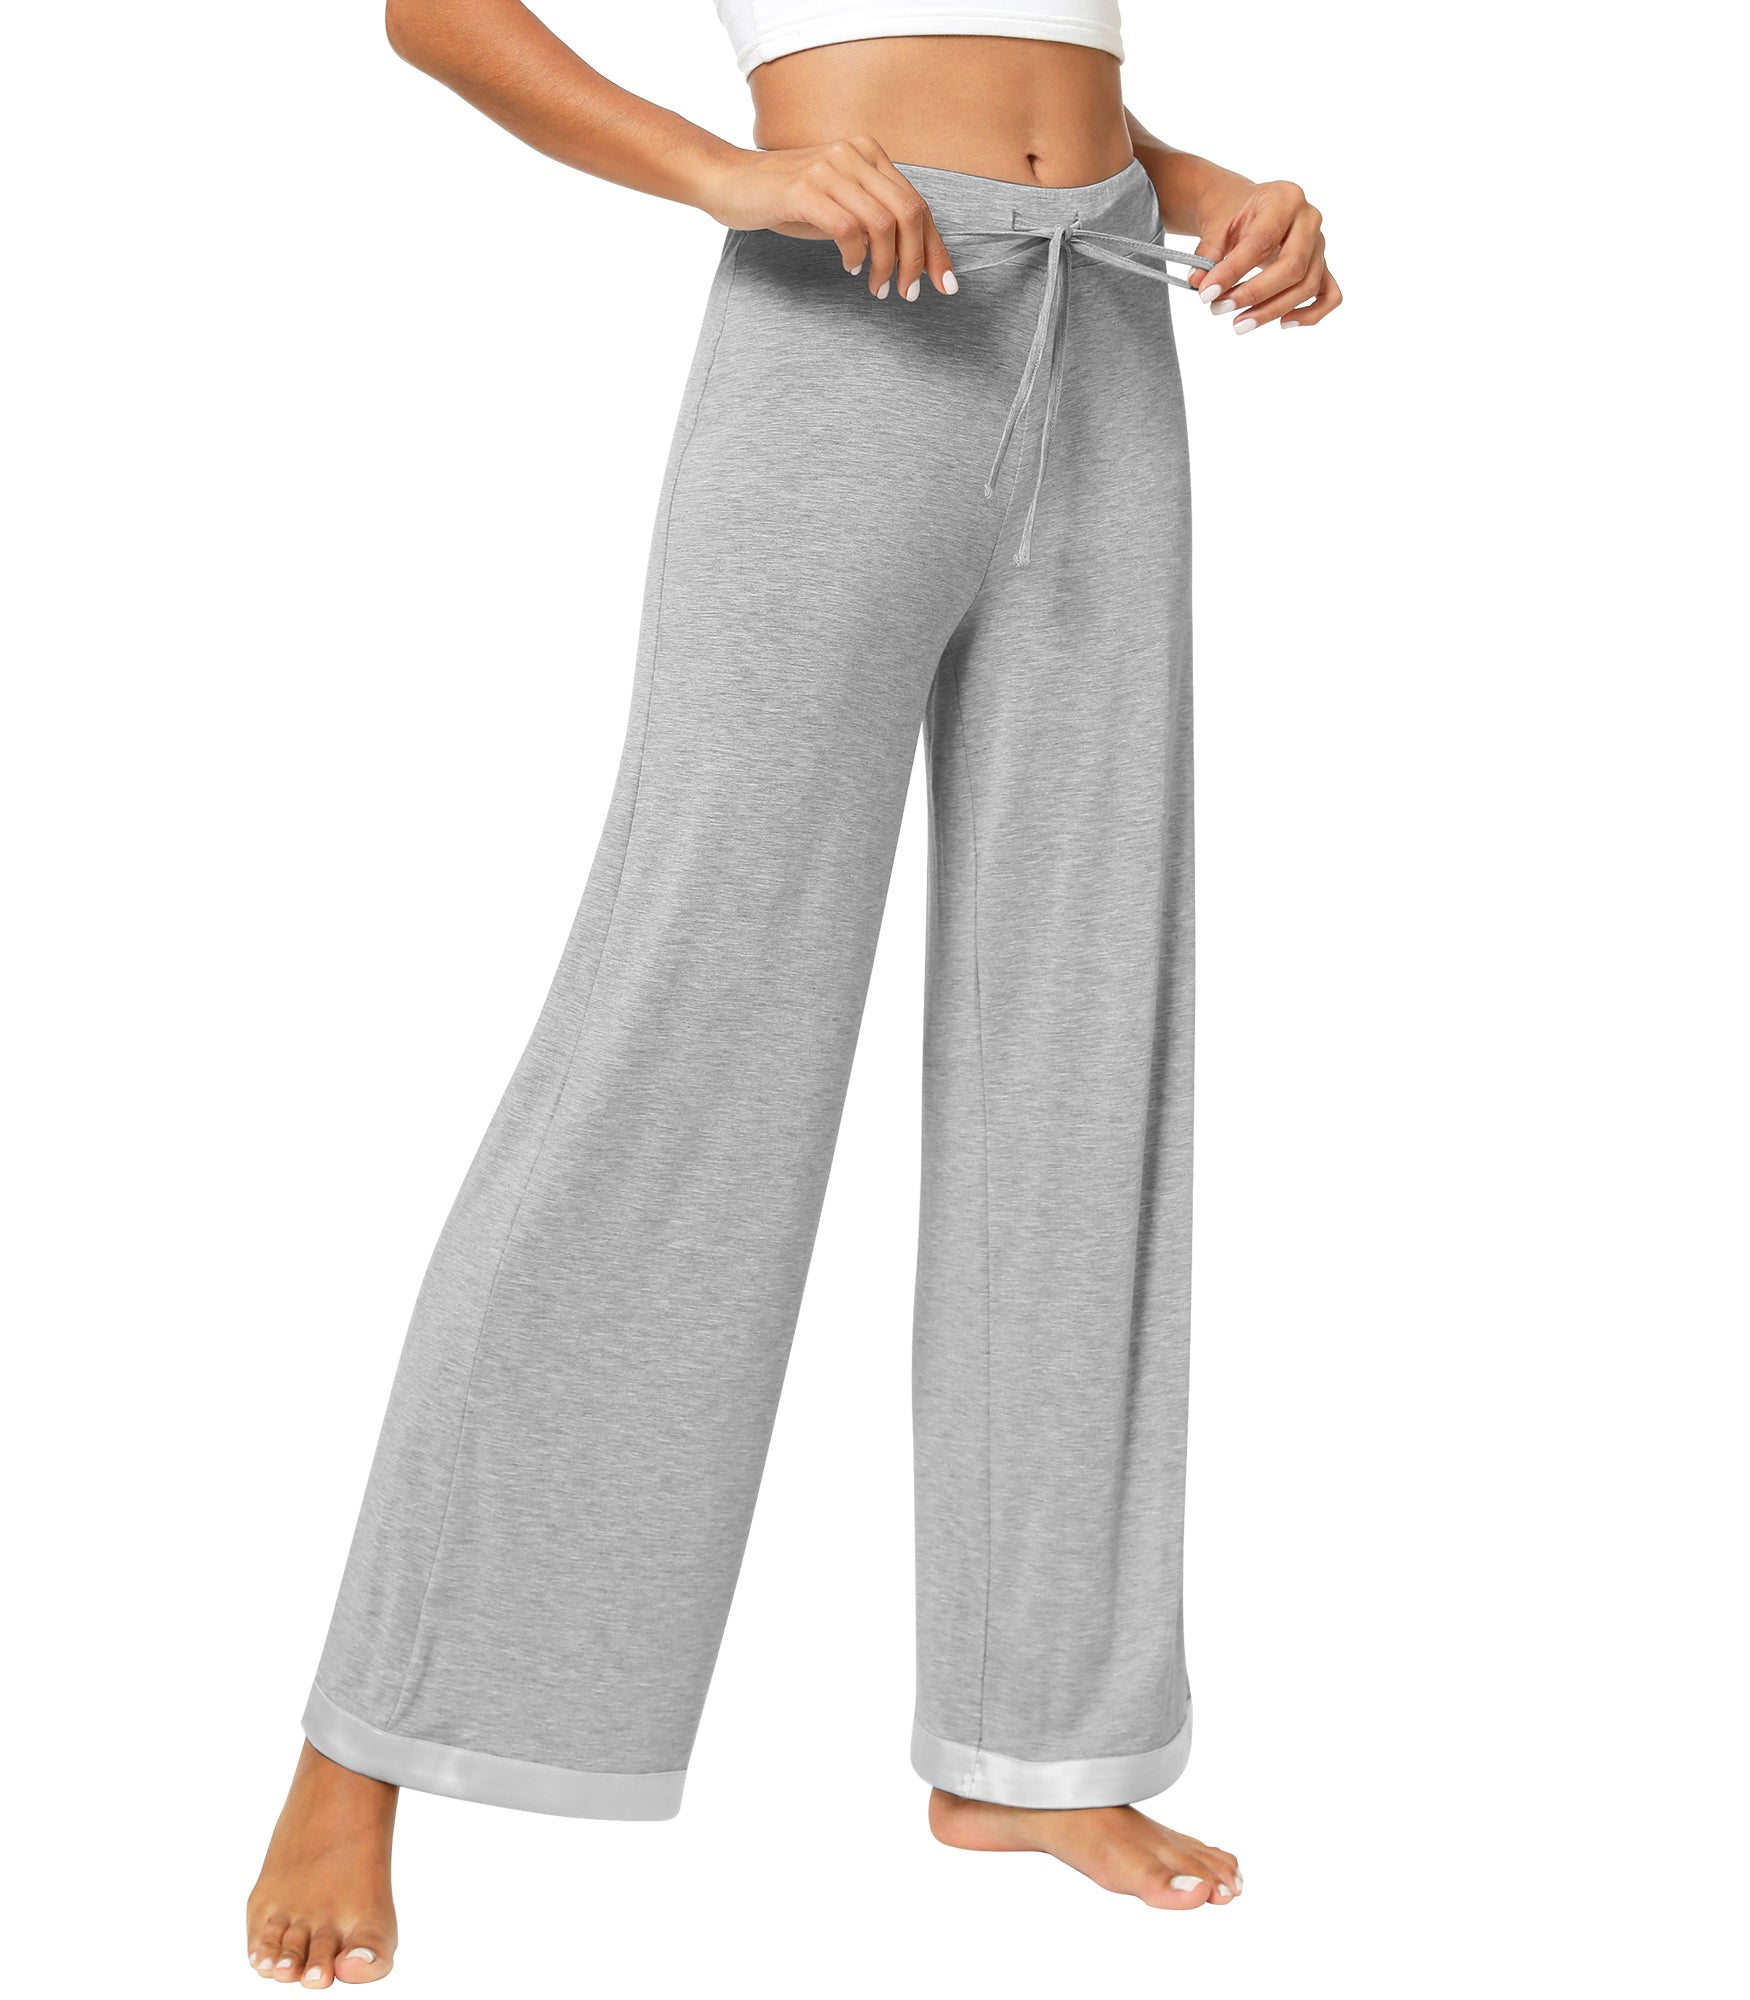 Best Deal for Soft Pajama Pants for Women Comfy Bamboo Lounge Sleep Pants